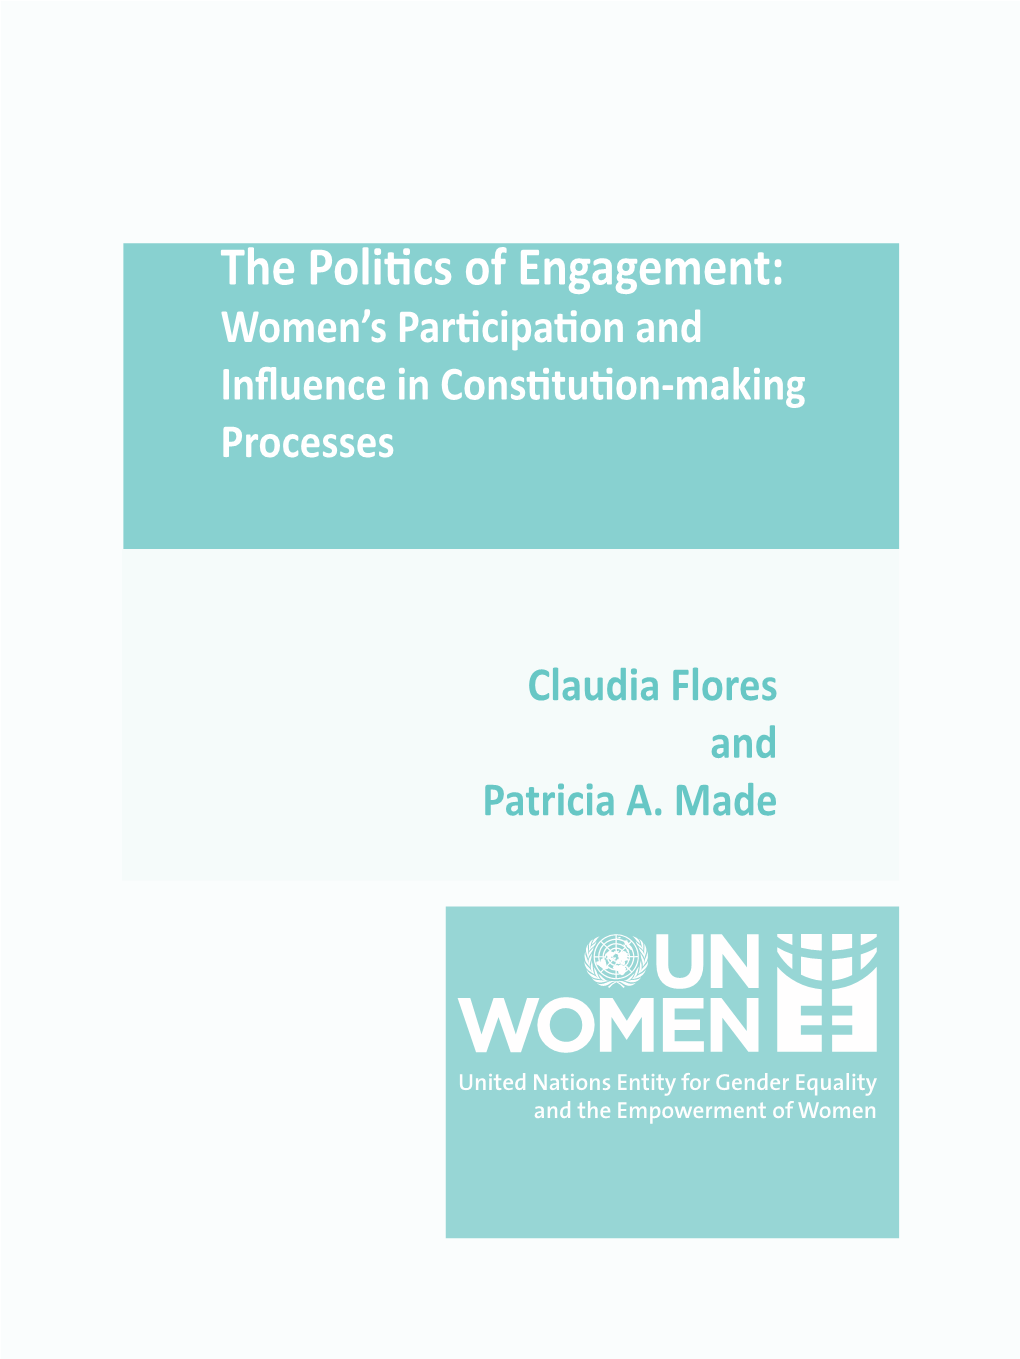 The Politics of Engagement: Women’S Participation and Influence in Constitution-Making Processes